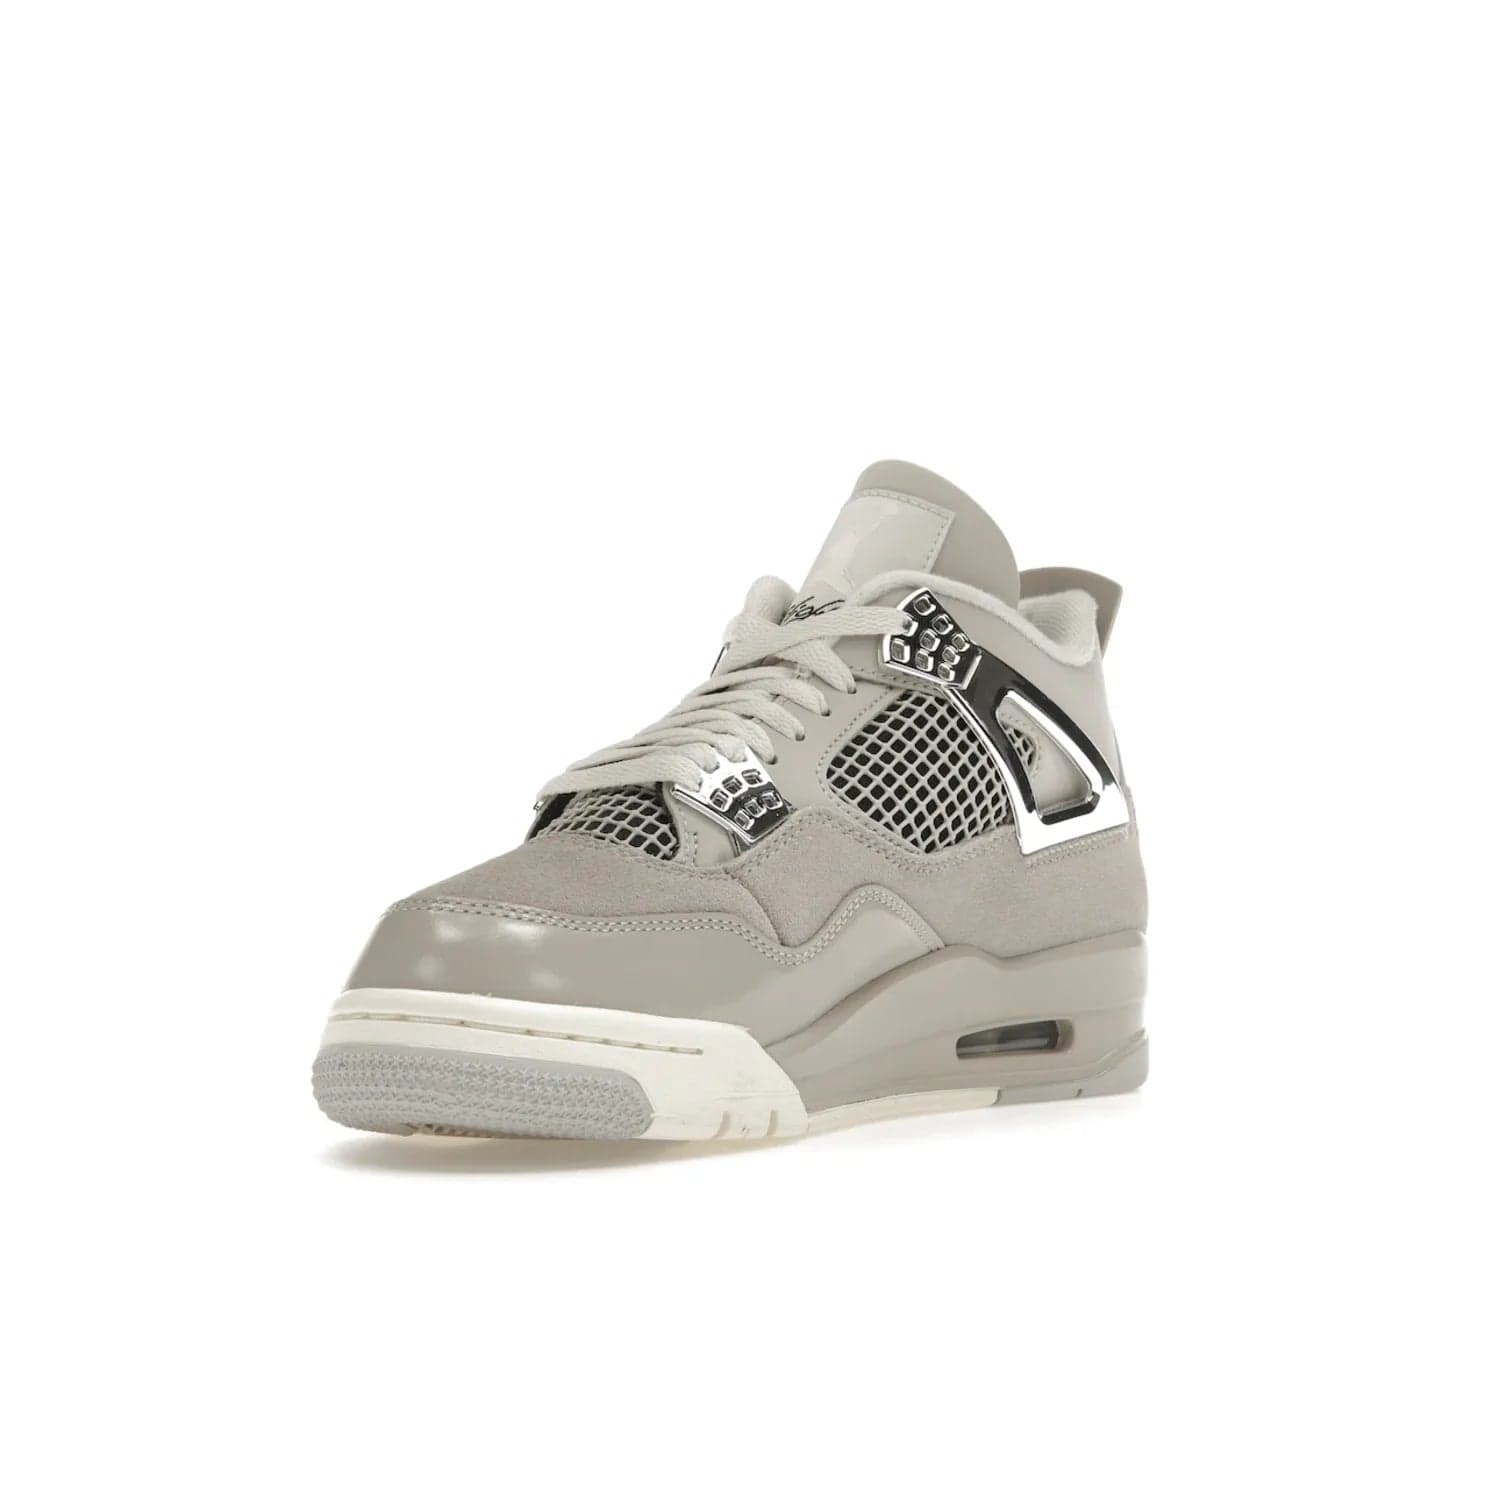 Jordan 4 Retro Frozen Moments (Women's) - Image 14 - Only at www.BallersClubKickz.com - The Jordan 4 Retro Frozen Moments is a stylish blend of classic design elements and modern tones. Featuring suede and leather overlays in a light iron-ore, sail, neutral grey, black, and metallic silver colorway. Get this iconic high-performance sneaker for $210.